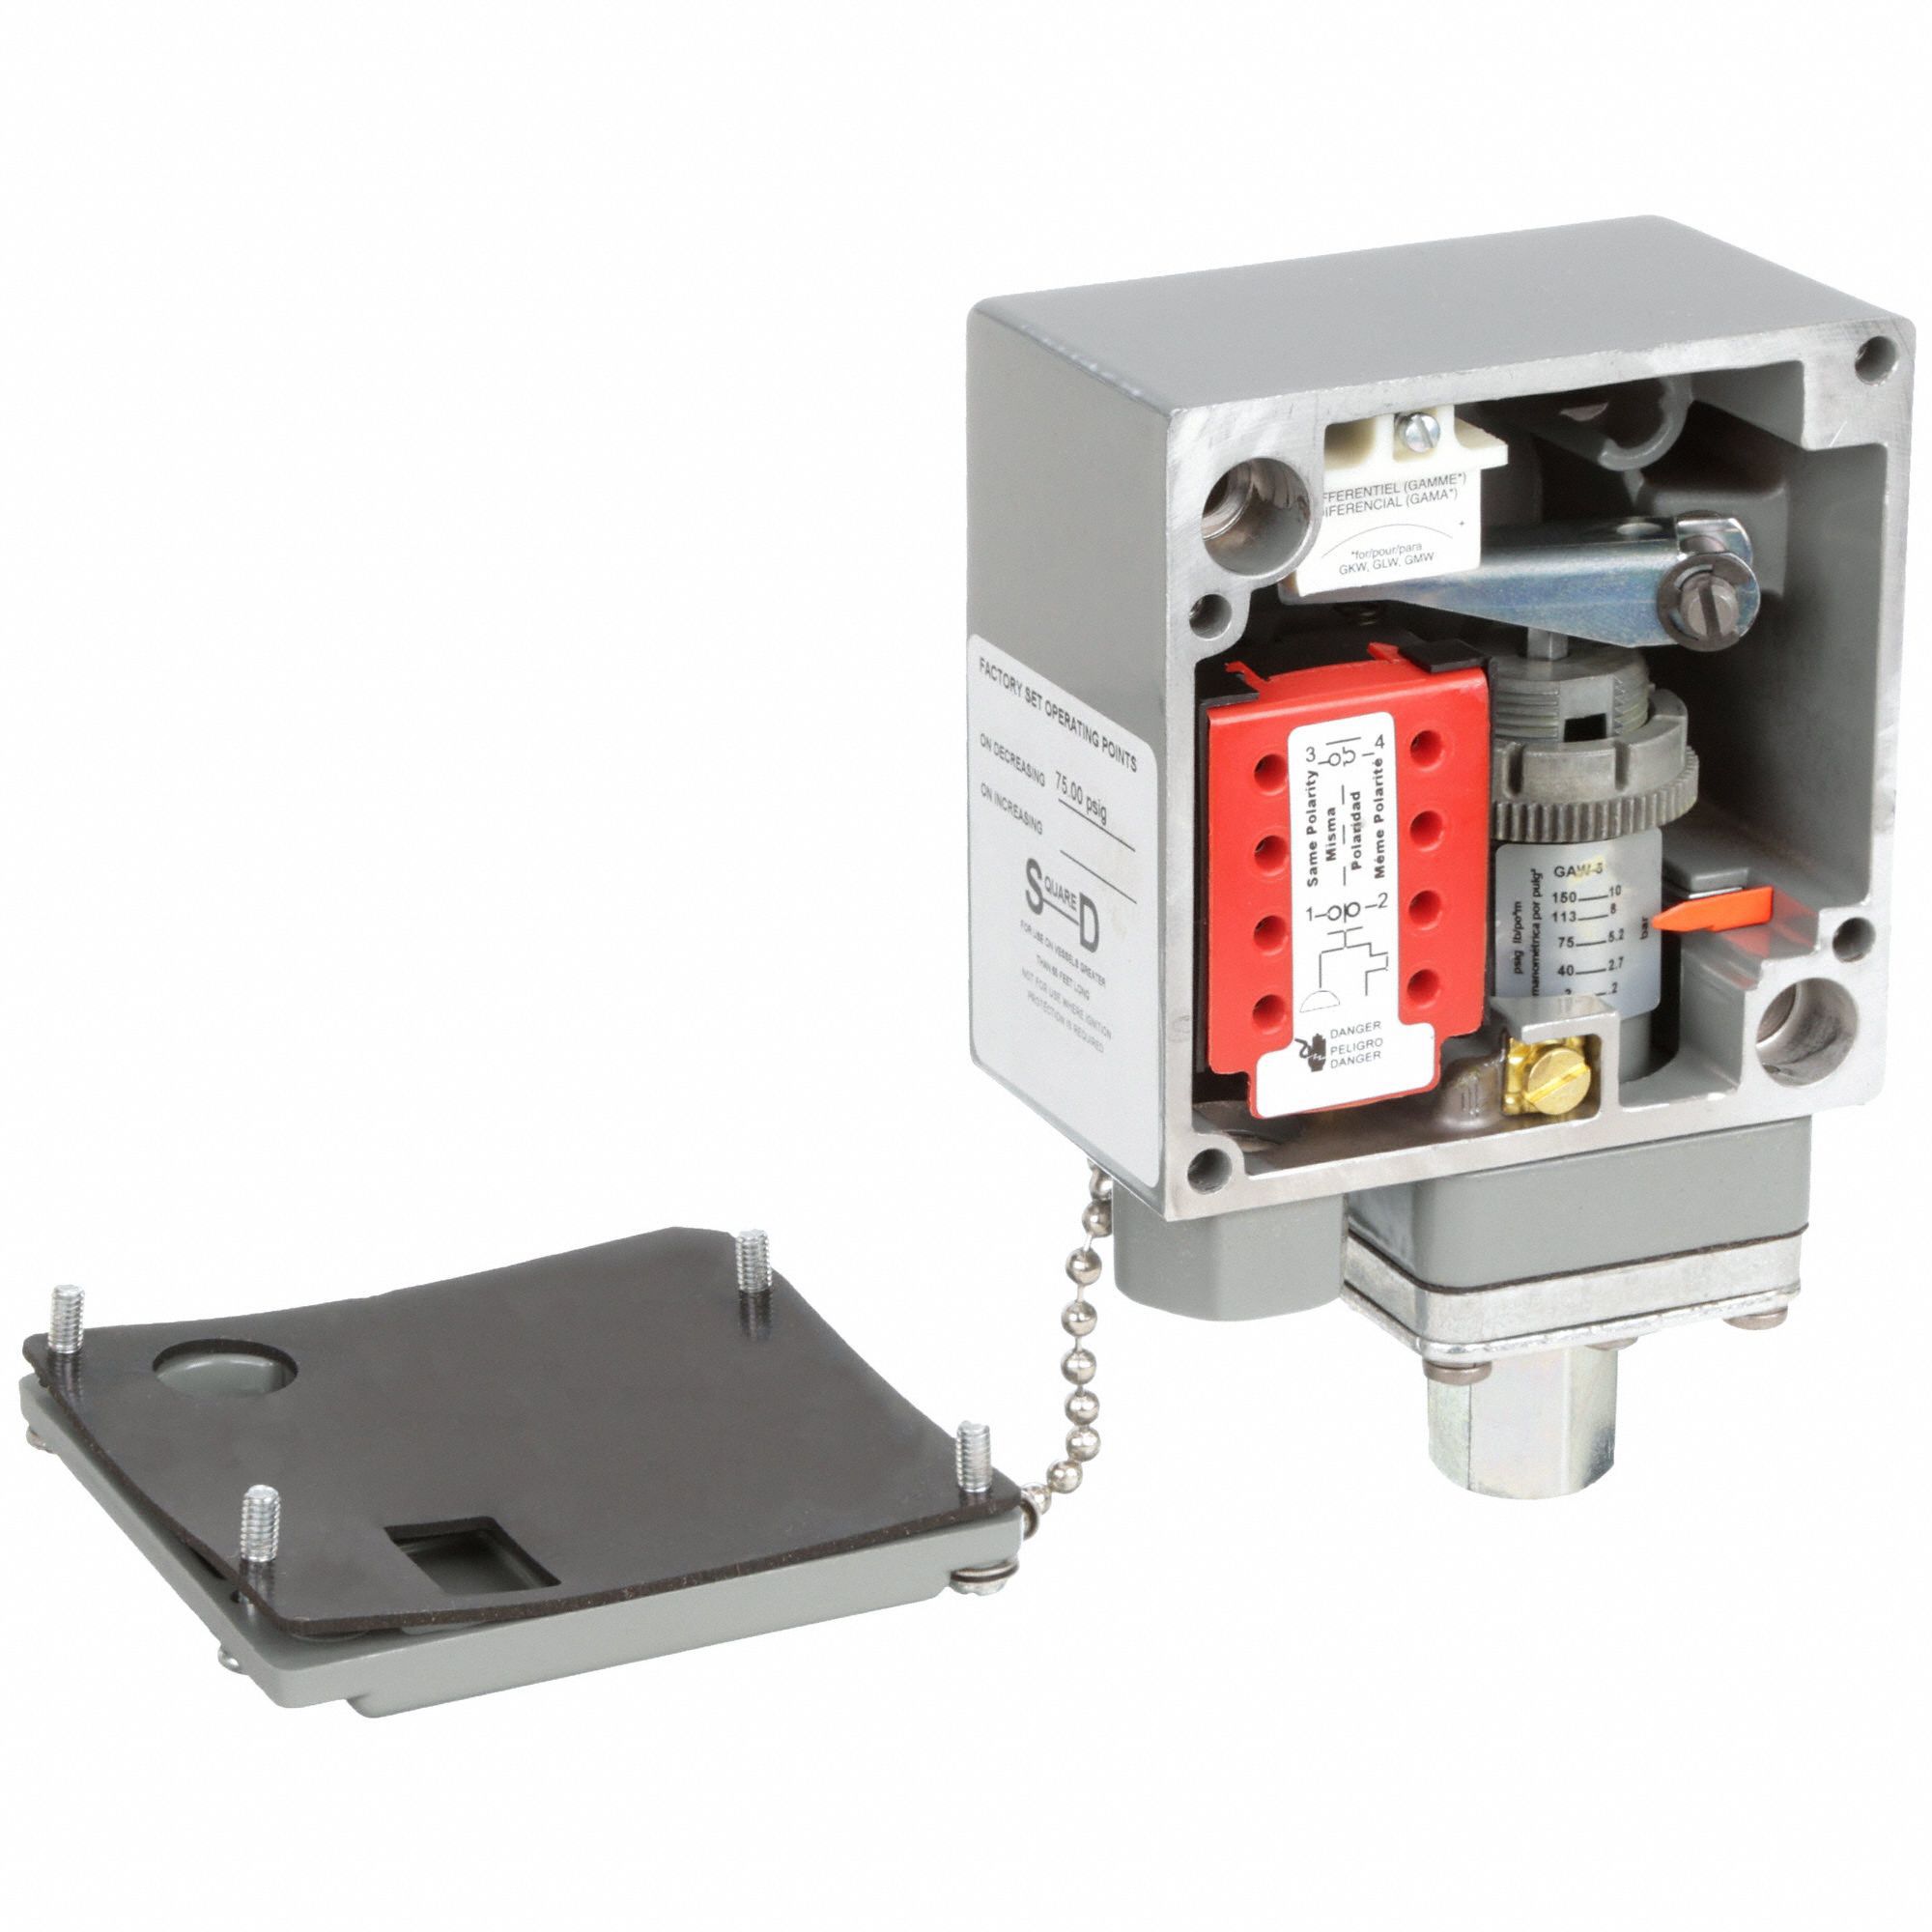 Square D 9012GAW5 Single-Stage Diaphragm-Actuated Pressure Switch Range Connection 4X NEMA 4 3-150 psi Press 1/4-18 NPTF Press and 13 Enc. SPDT Contacts 